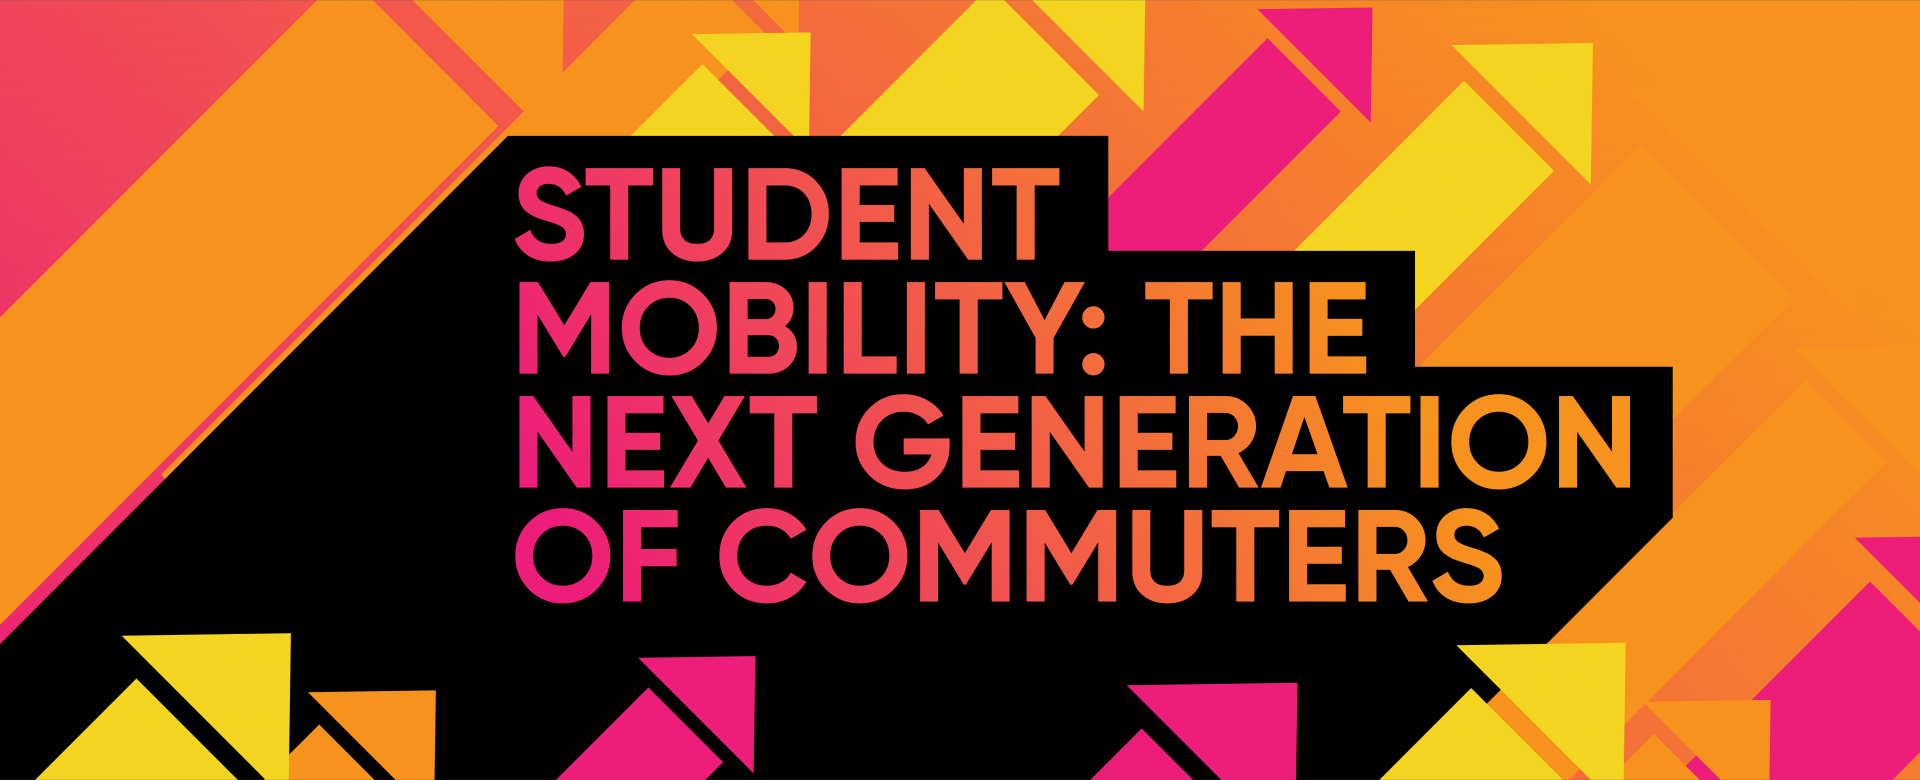 STUDENT MOBILITY: THE NEXT GENERATION OF COMMUTERS